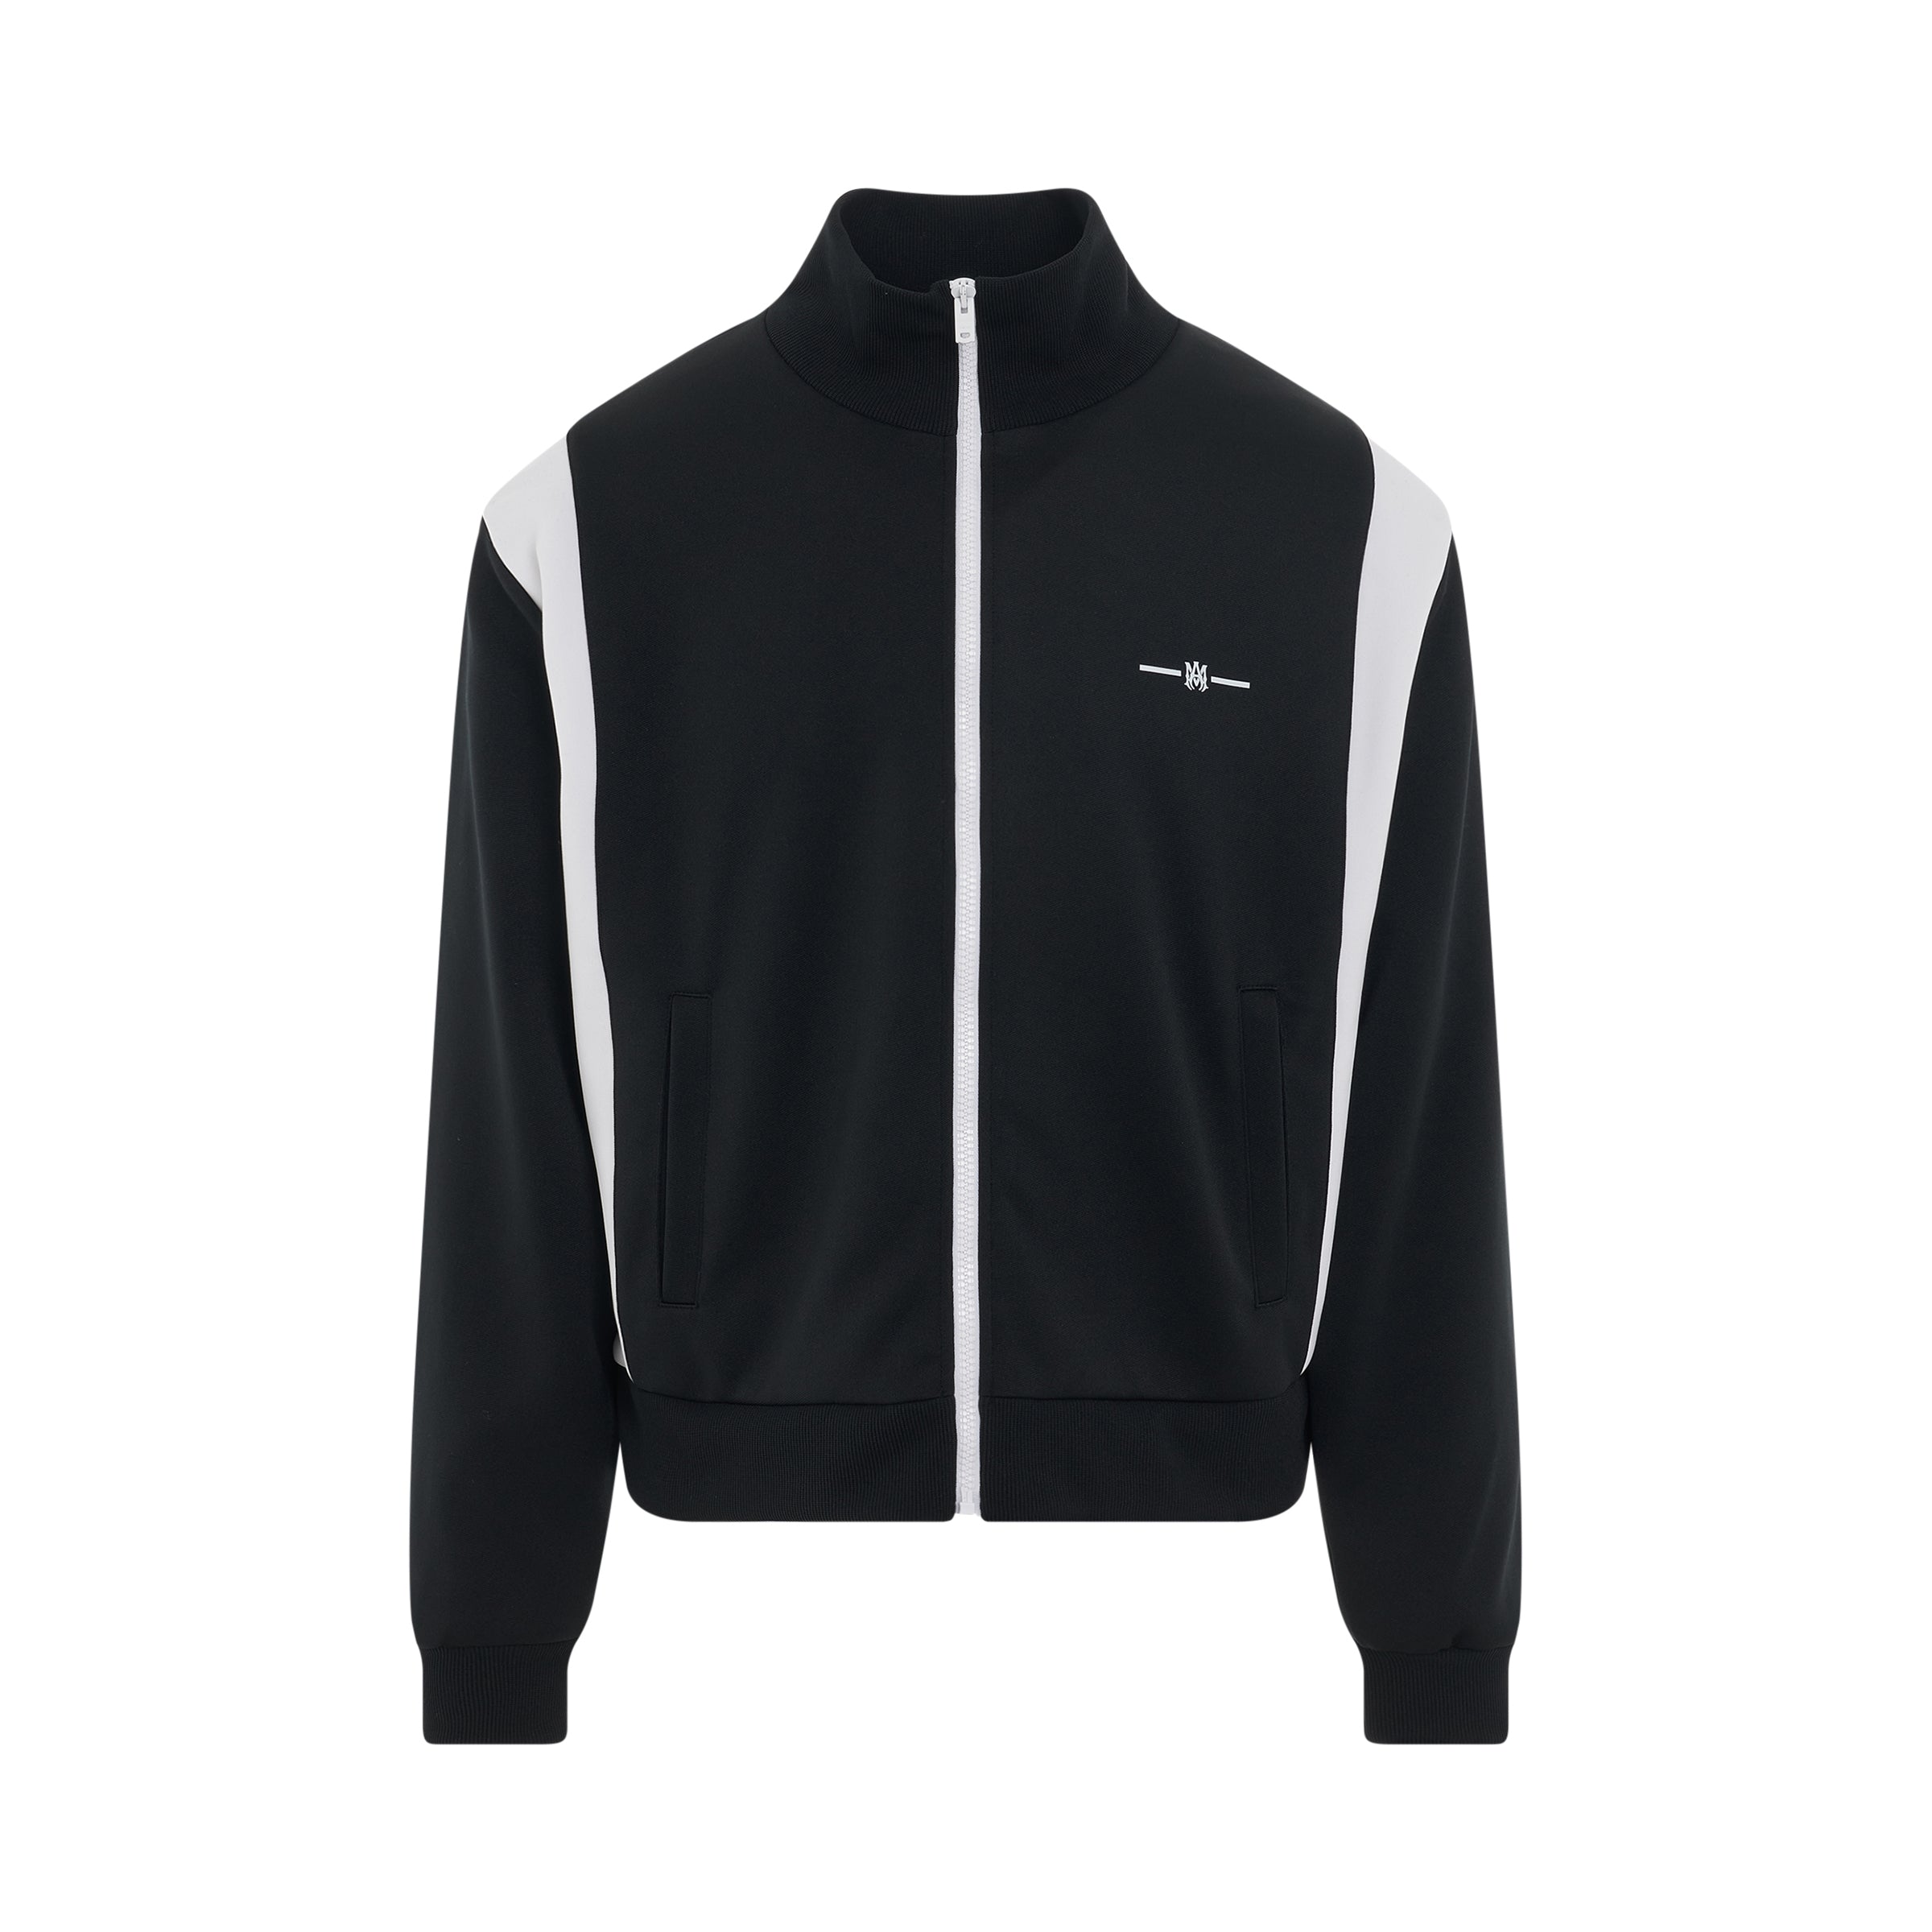 amiri always on point track jacket in black sold out sold out sale earn ...